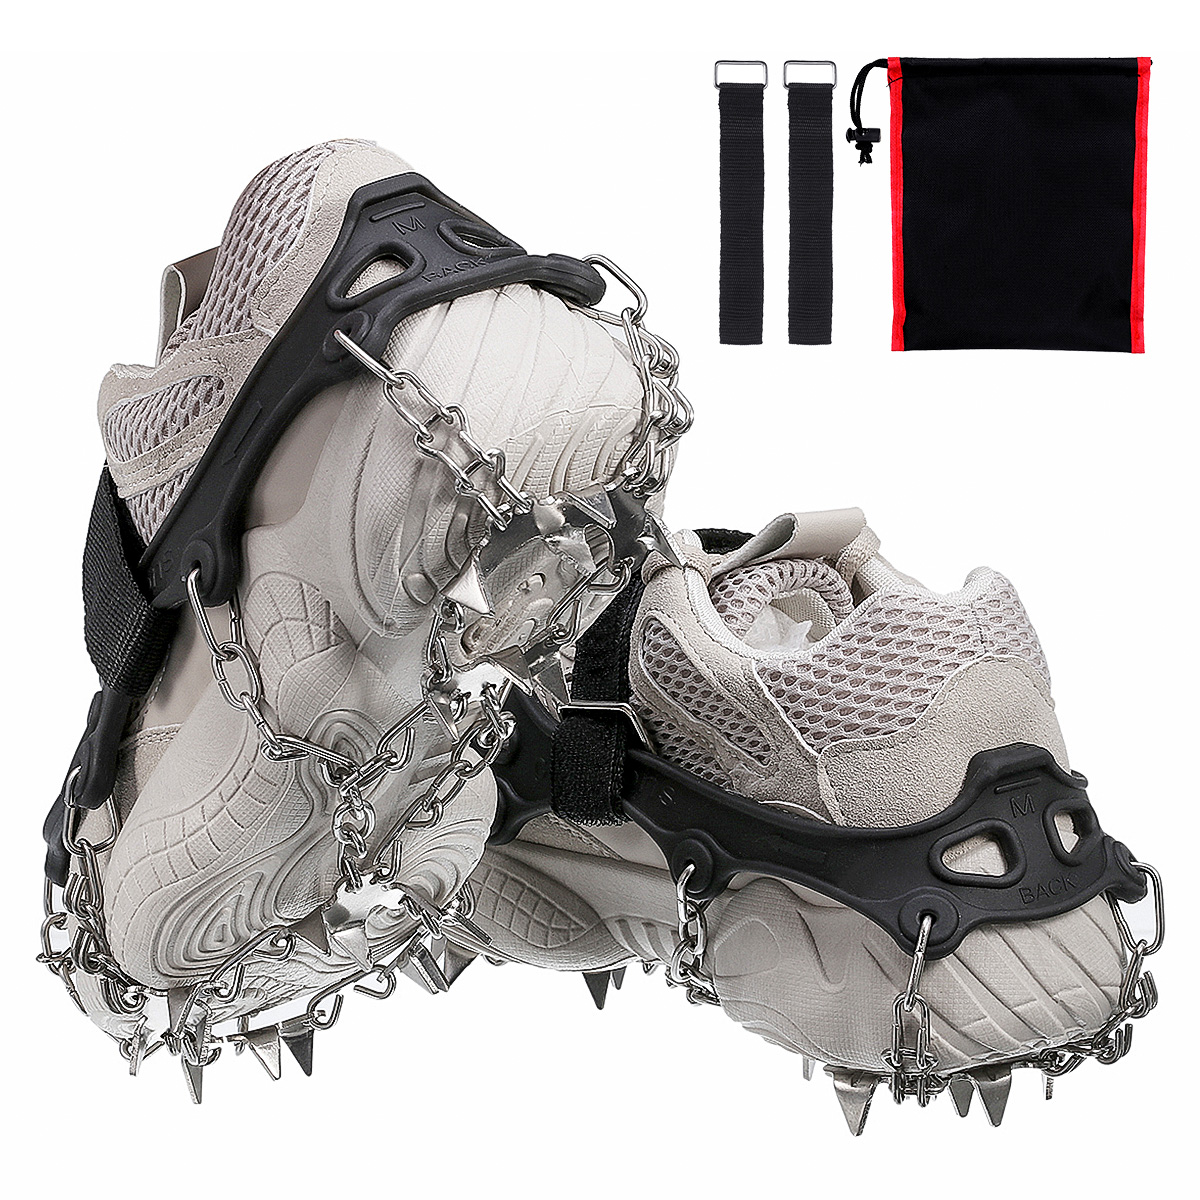 cleats for ice and snow